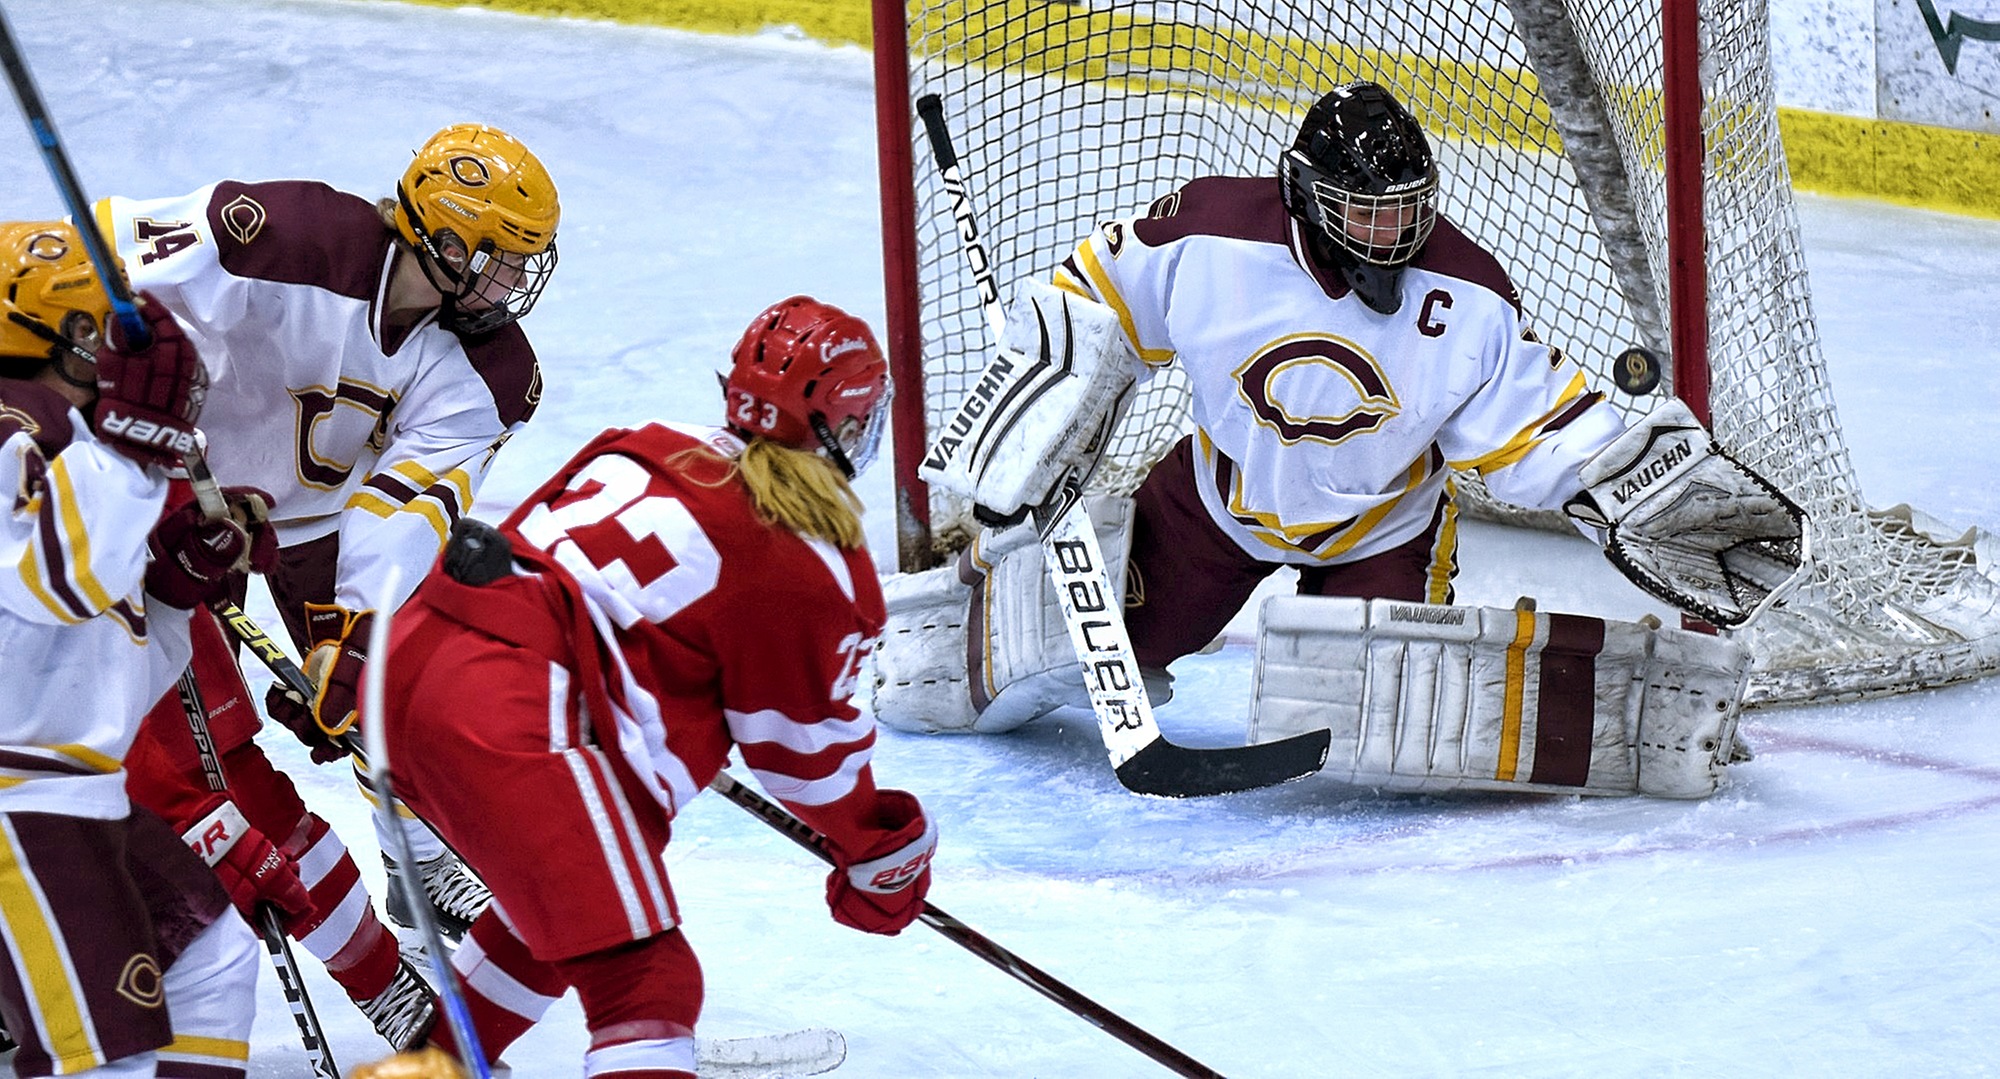 Senior goalie Brittany Boss makes one of her 21 saves in Concordia's 1-1 OT tie with St. Mary's.